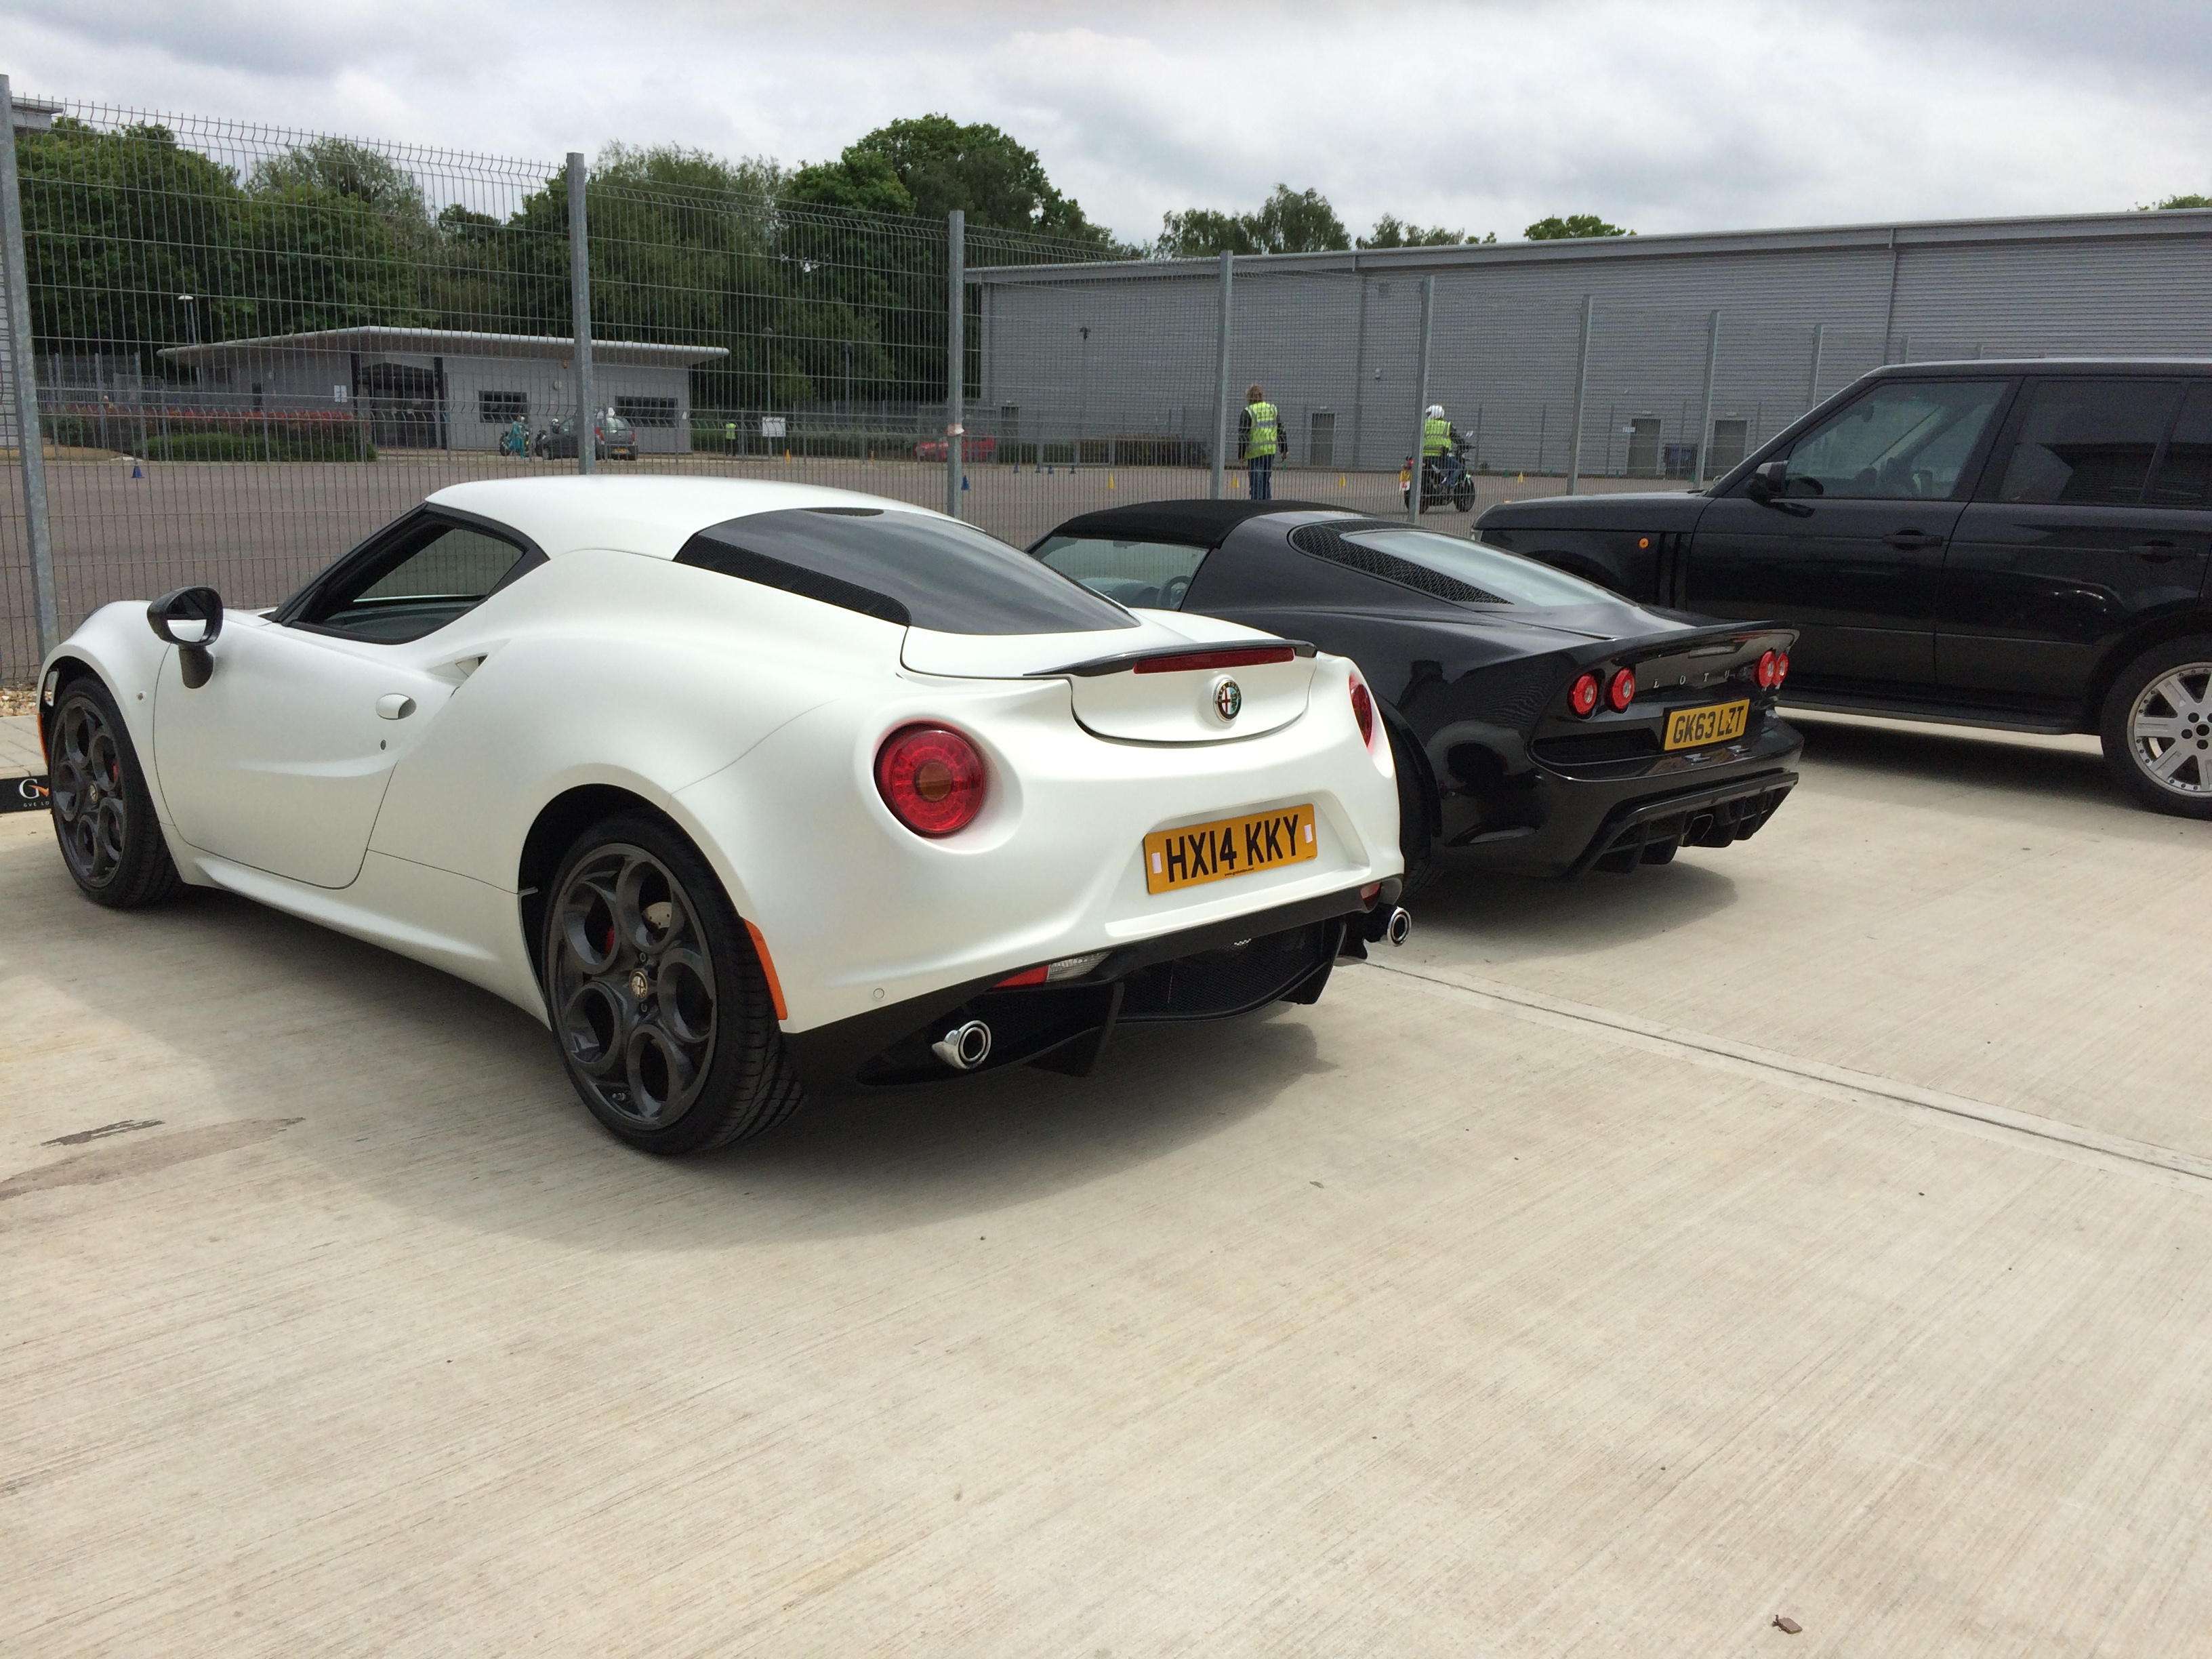 4C - Where are we with prices right now? - Page 5 - Alfa Romeo, Fiat & Lancia - PistonHeads